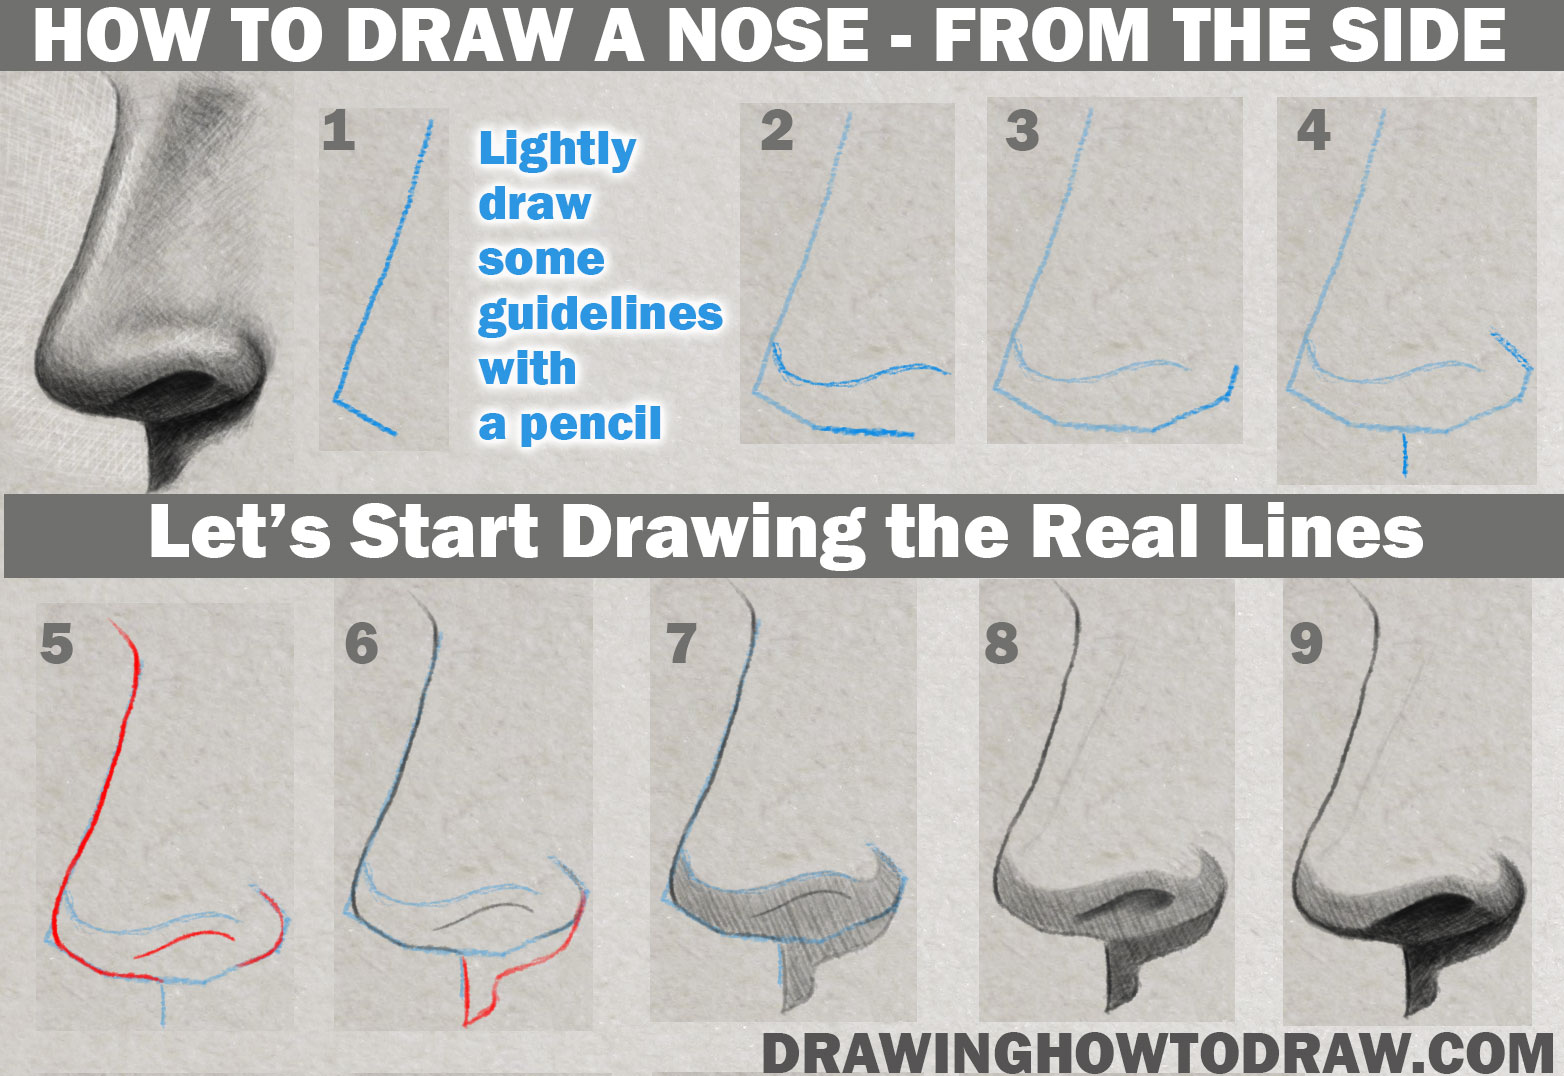 Drawing the face in profile – Part 1 - Anime Art Magazine